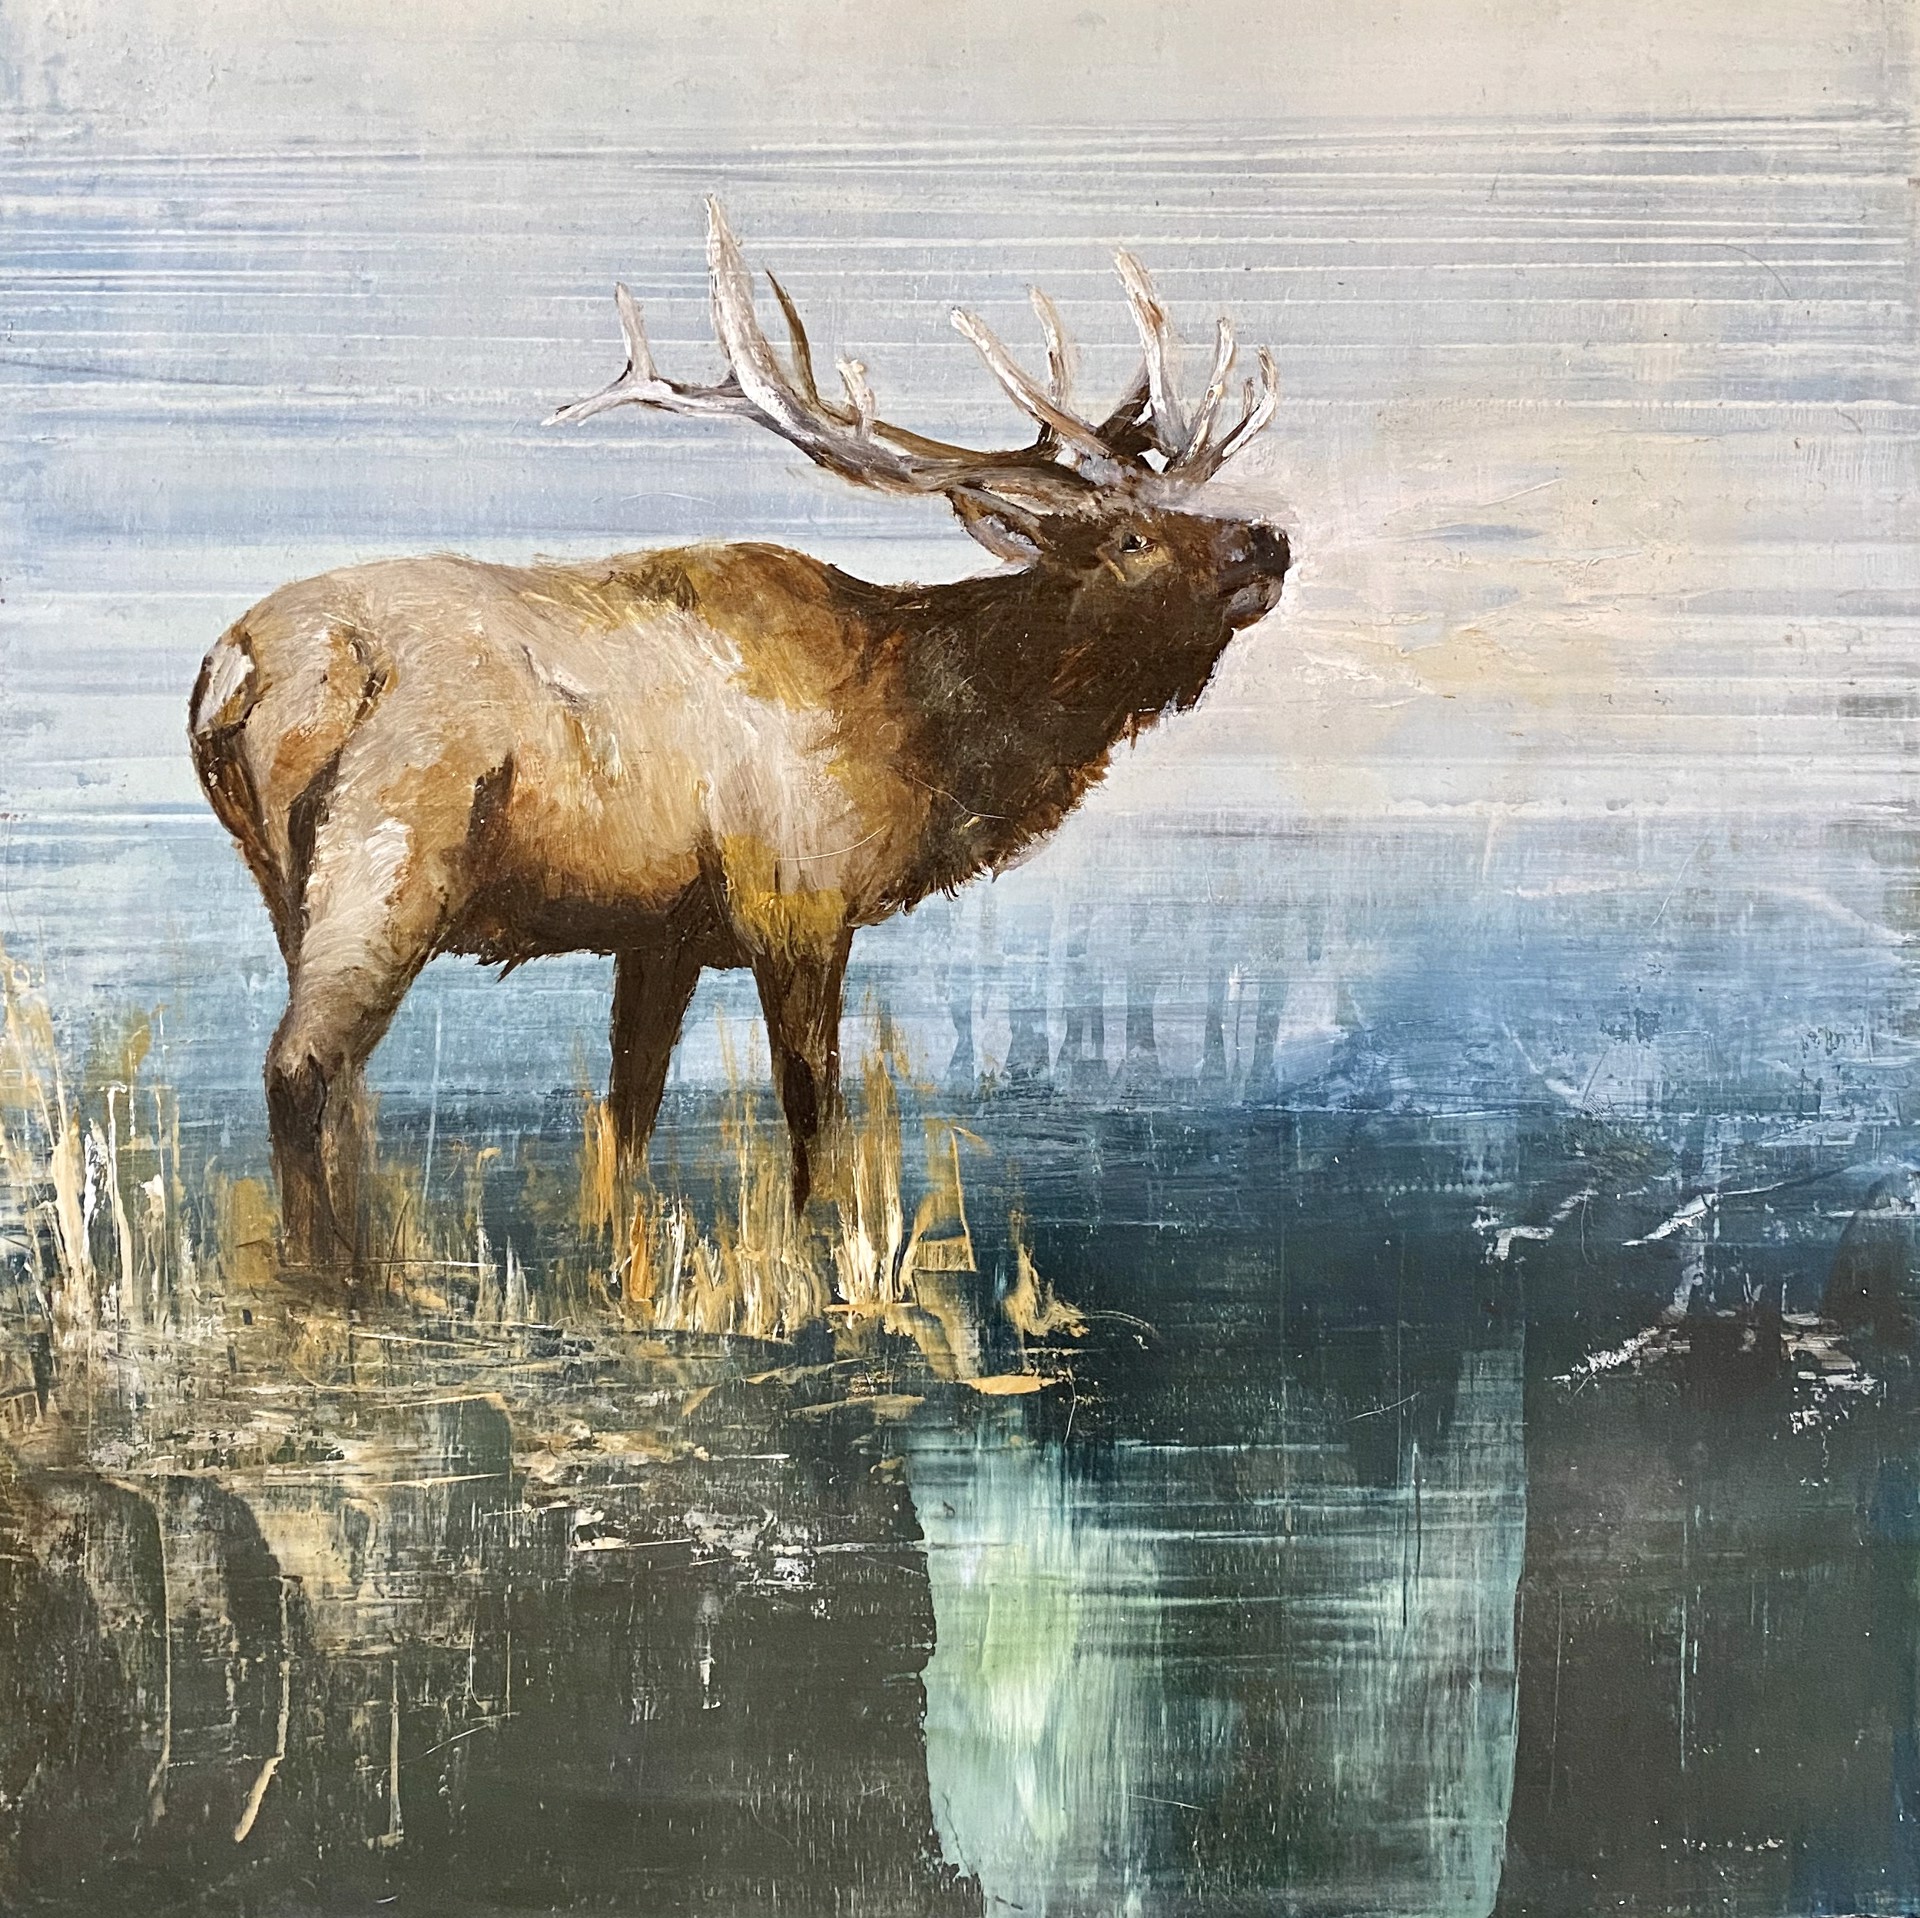 A Contemporary Oil Painting Of A Bull Elk Standing In Tall Grass At The Edge Of Water With An Abstract Background, Jenna Von Benedikt